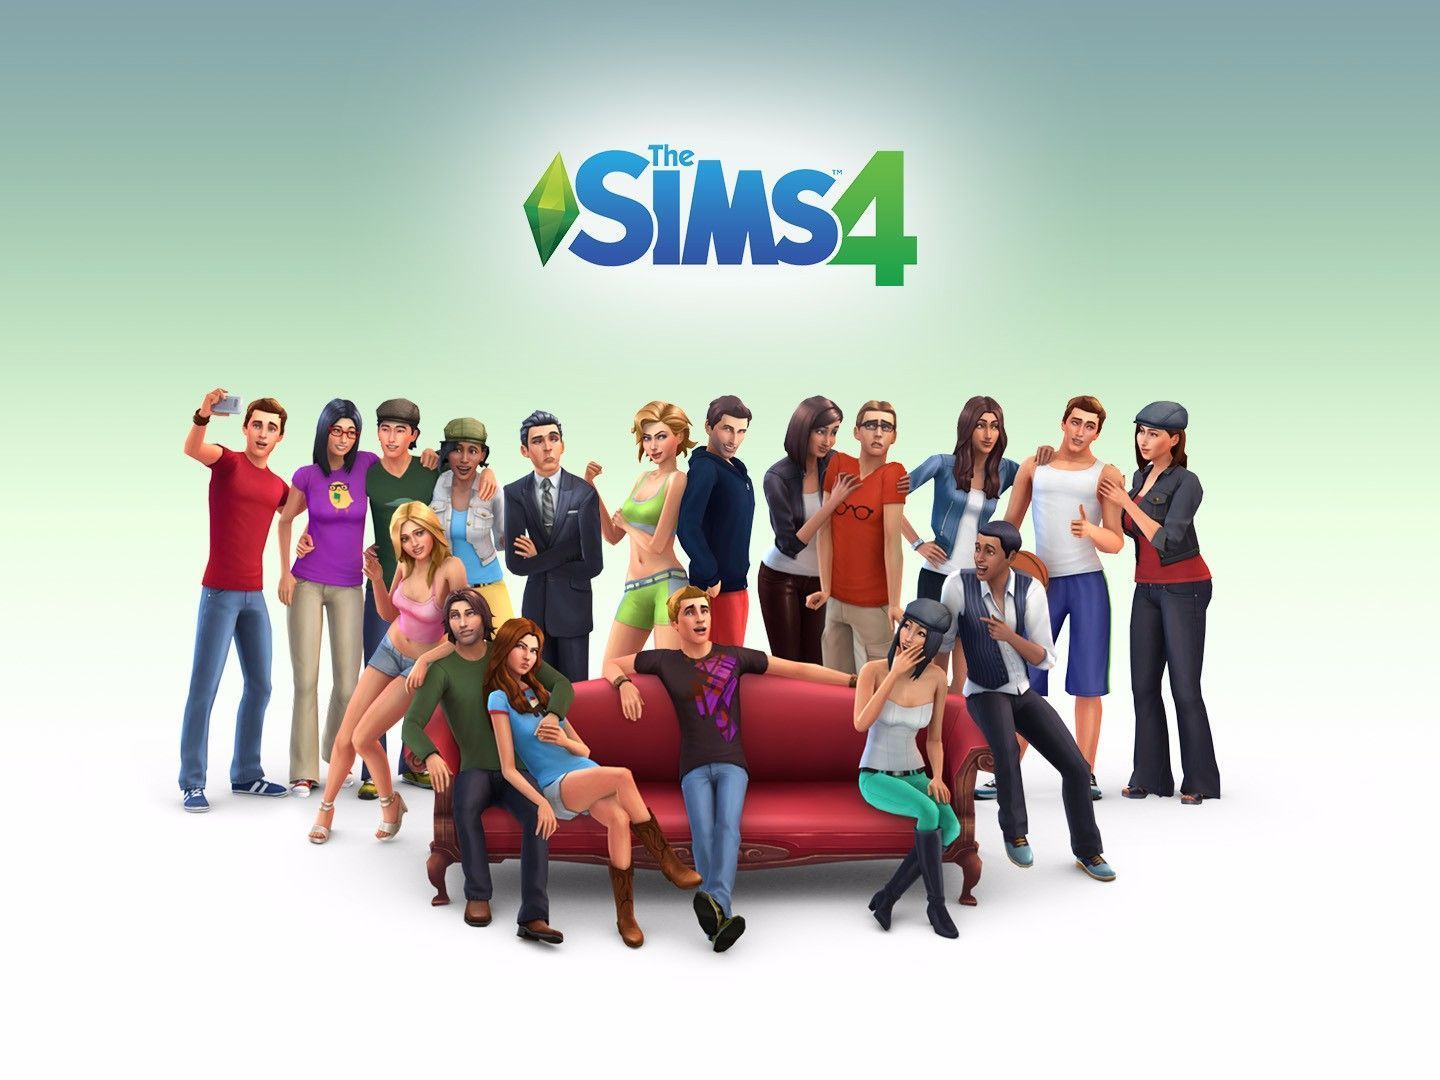 Sims 4 2019 review